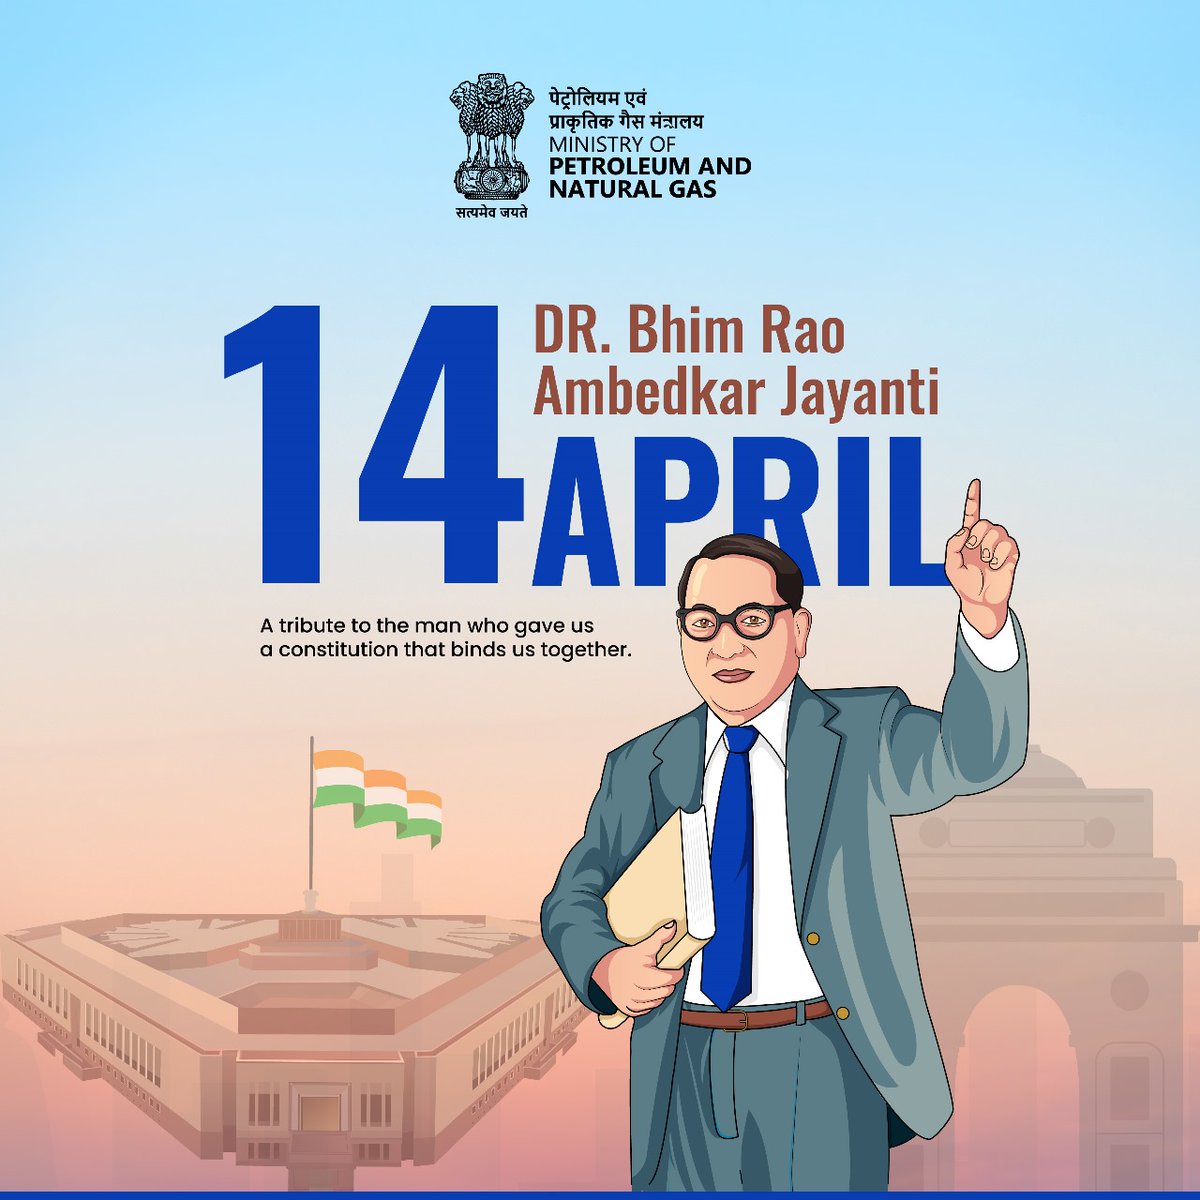 Let's honor the architect of the Indian Constitution, Dr. B.R. Ambedkar. His vision for a progressive society resonates with our commitment to fueling India's growth. #AmbedkarJayanti